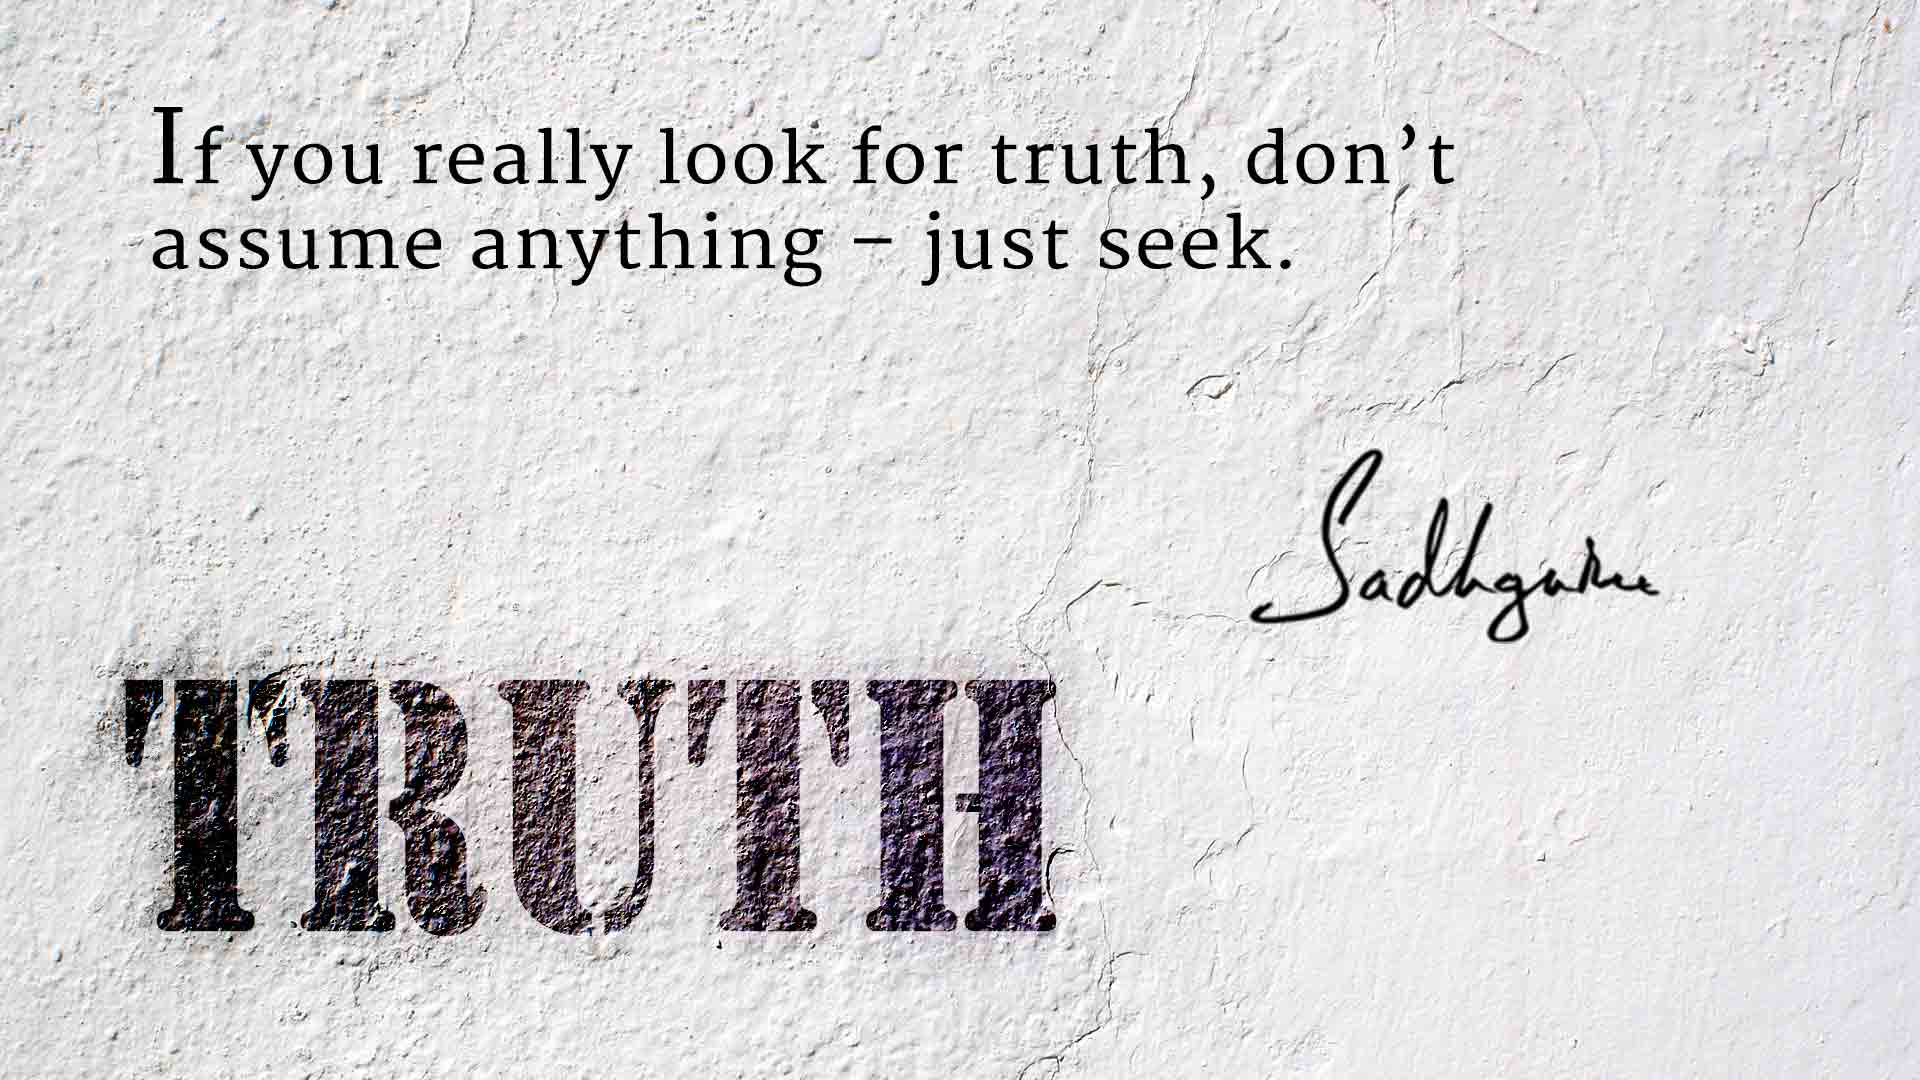 Sadhguru Quotes and Sayings About Truth